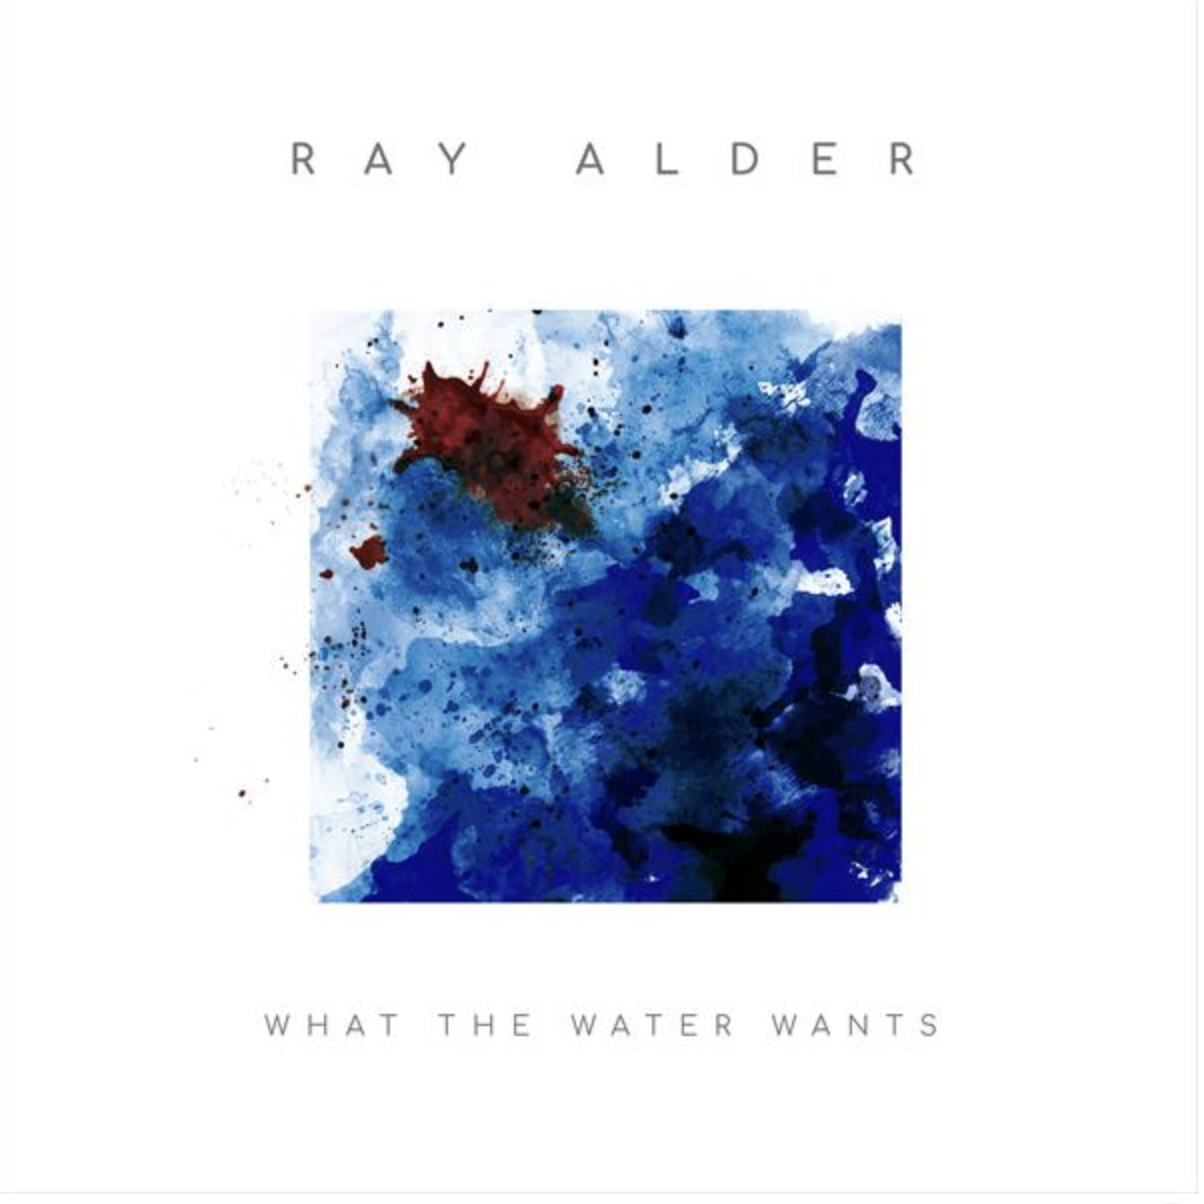 Metal-Review: RAY ALDER – WHAT THE WATER WANTS